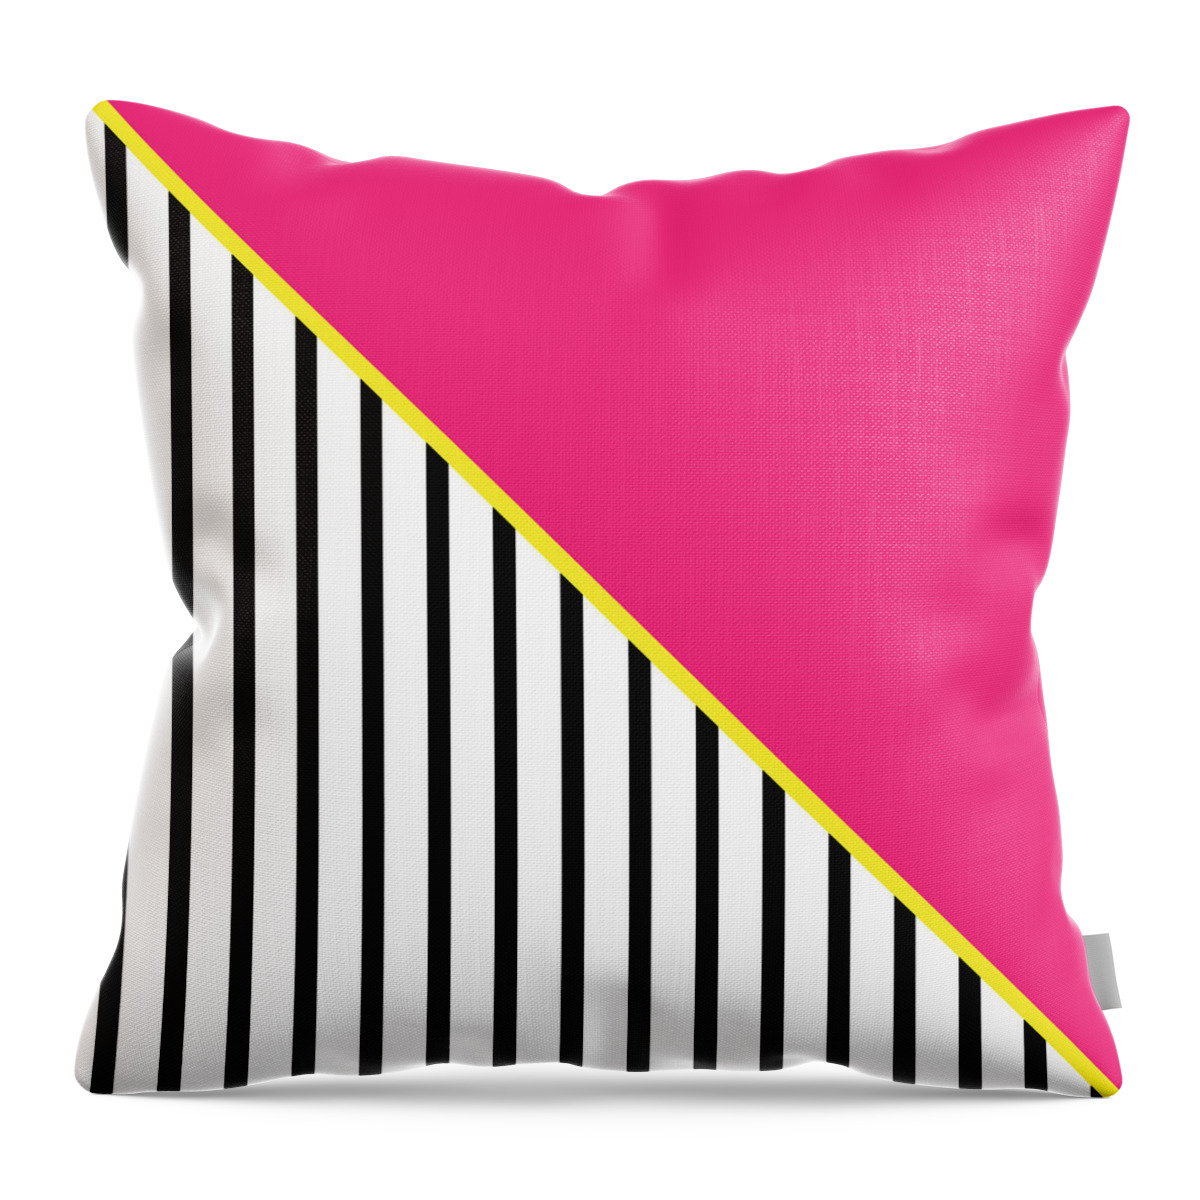 Pink Yellow White Black Stripes Lines Triangles Geometricshapes Abstract Contemporary Trending Styles On Trend Home Decor Bedroom Art Kitchen Art Living Room Art Gallery Wall Art Art For Interior Designers Hospitality Art Set Design Pillow Home And Garden House Beautiful Art By Linda Woods Throw Pillow featuring the digital art Yellow Pink And Black Geometric 2 by Linda Woods